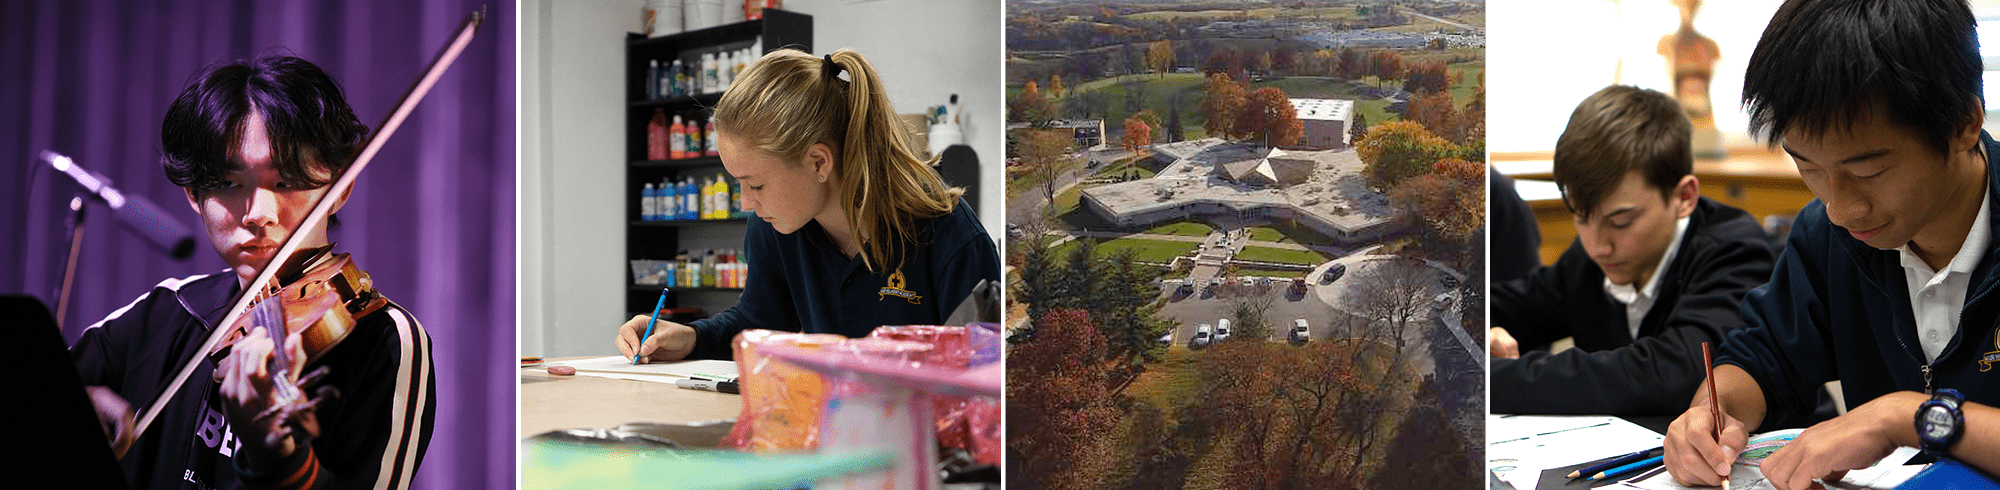 student playing a violin, a student studying, a birds eye view of campus, twi students working on homework